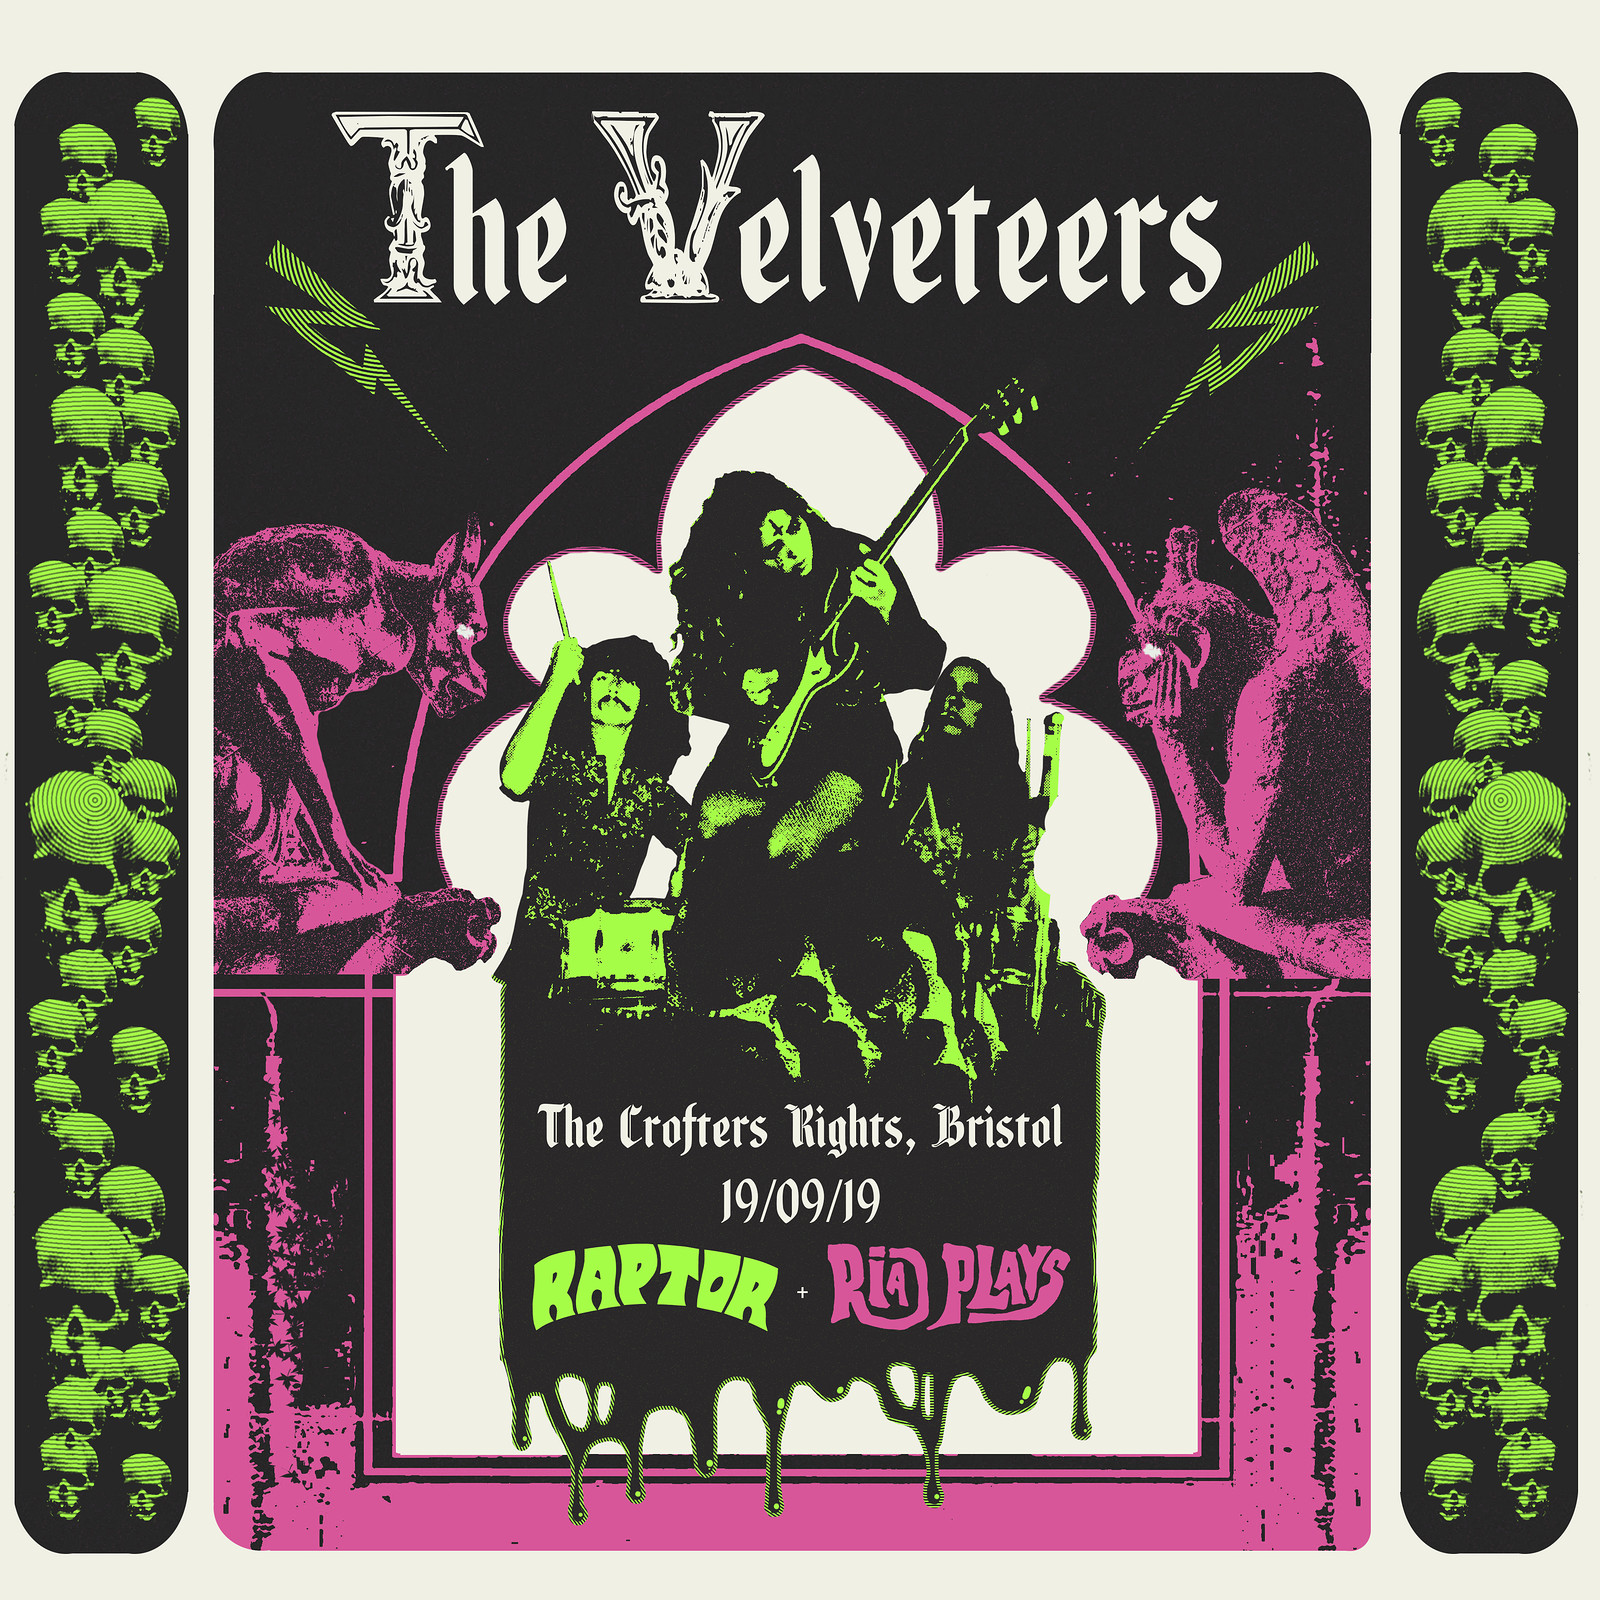 The Velveteers / Raptor / Ria Plays at Crofters Rights